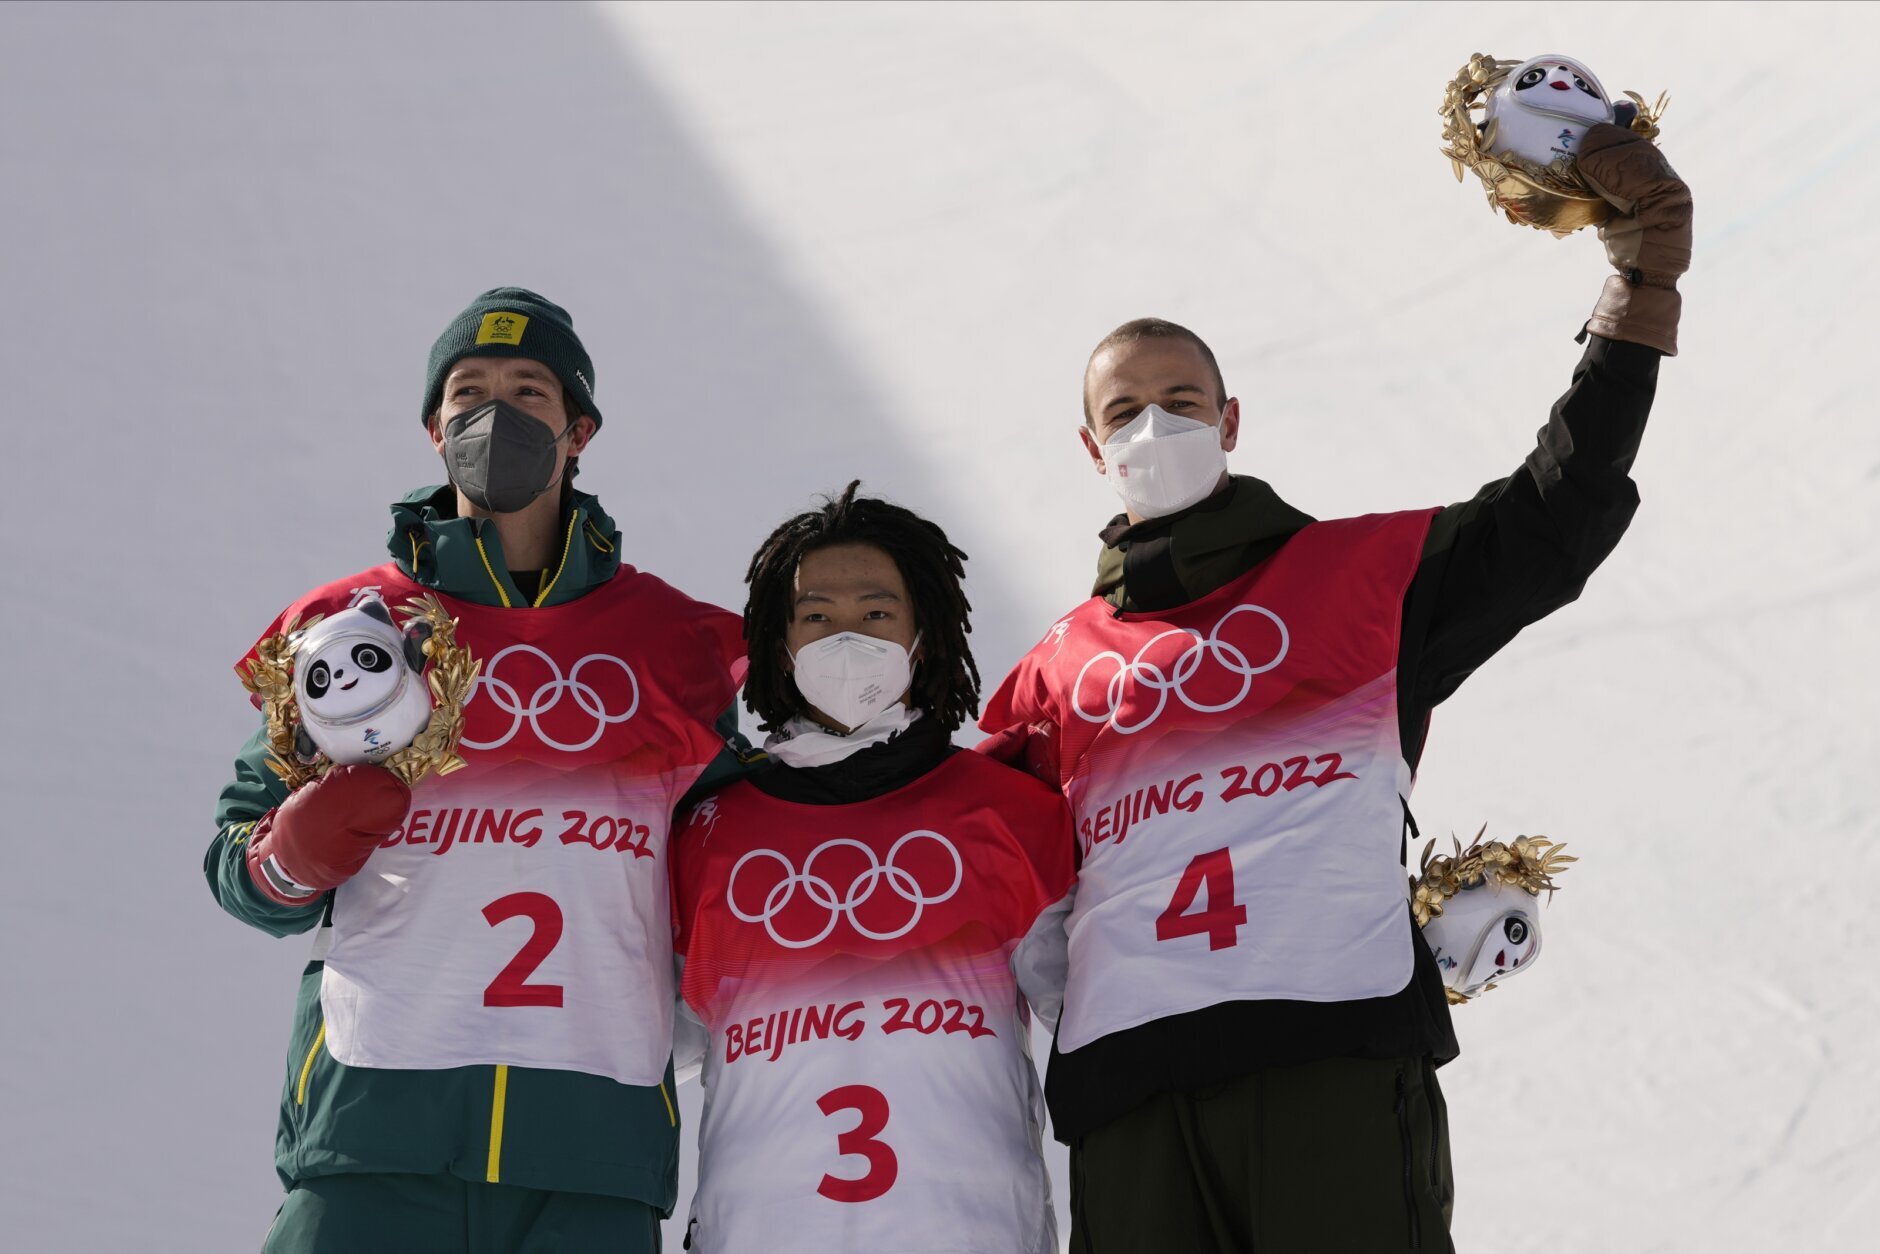 White wins halfpipe gold with epic final run